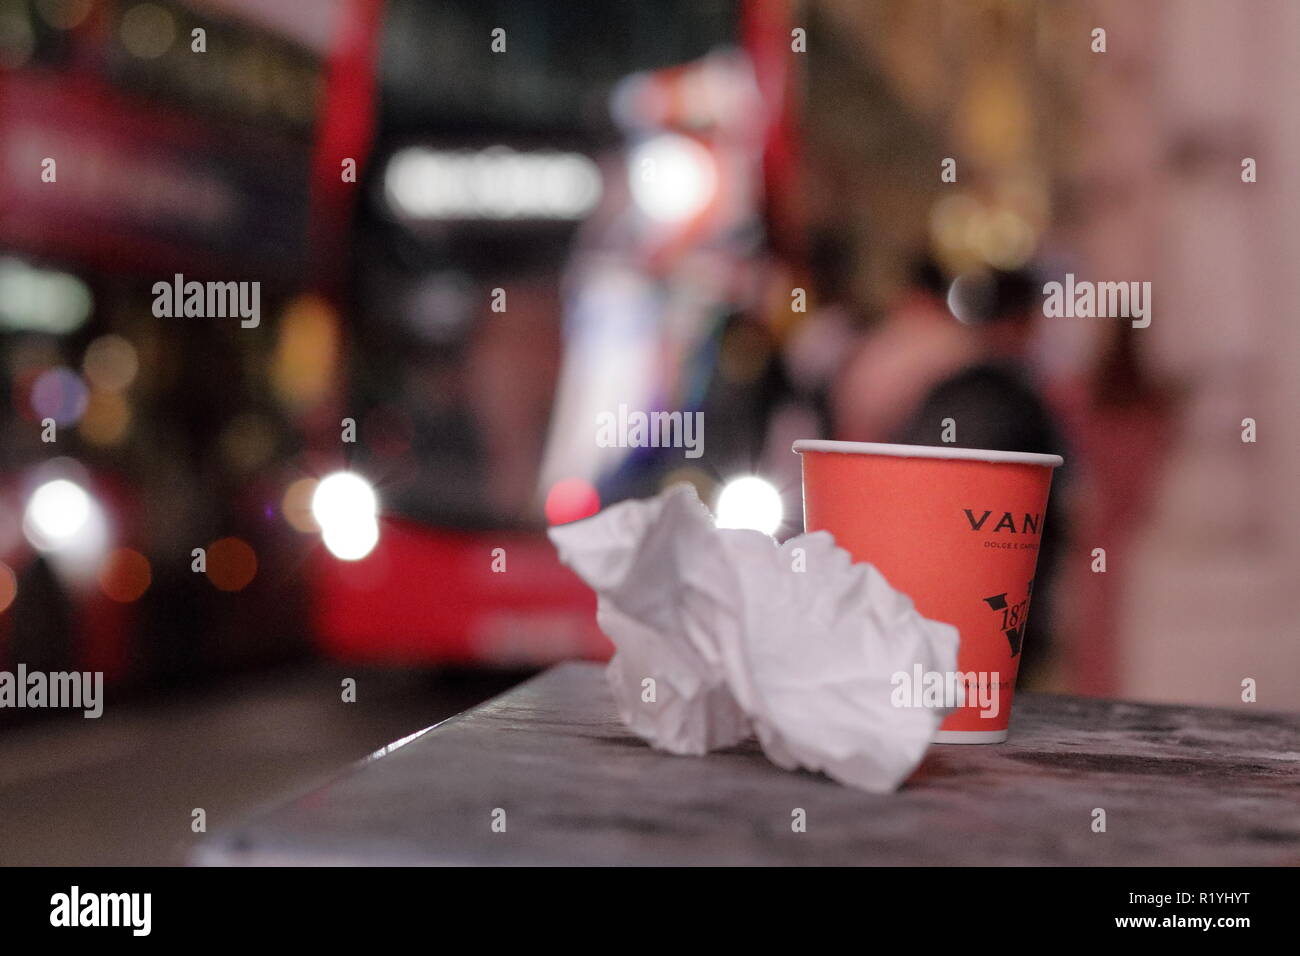 Night shot in London with famous red busses on the background with rubbish left on the street. Coffee cup and folded paper. Stock Photo